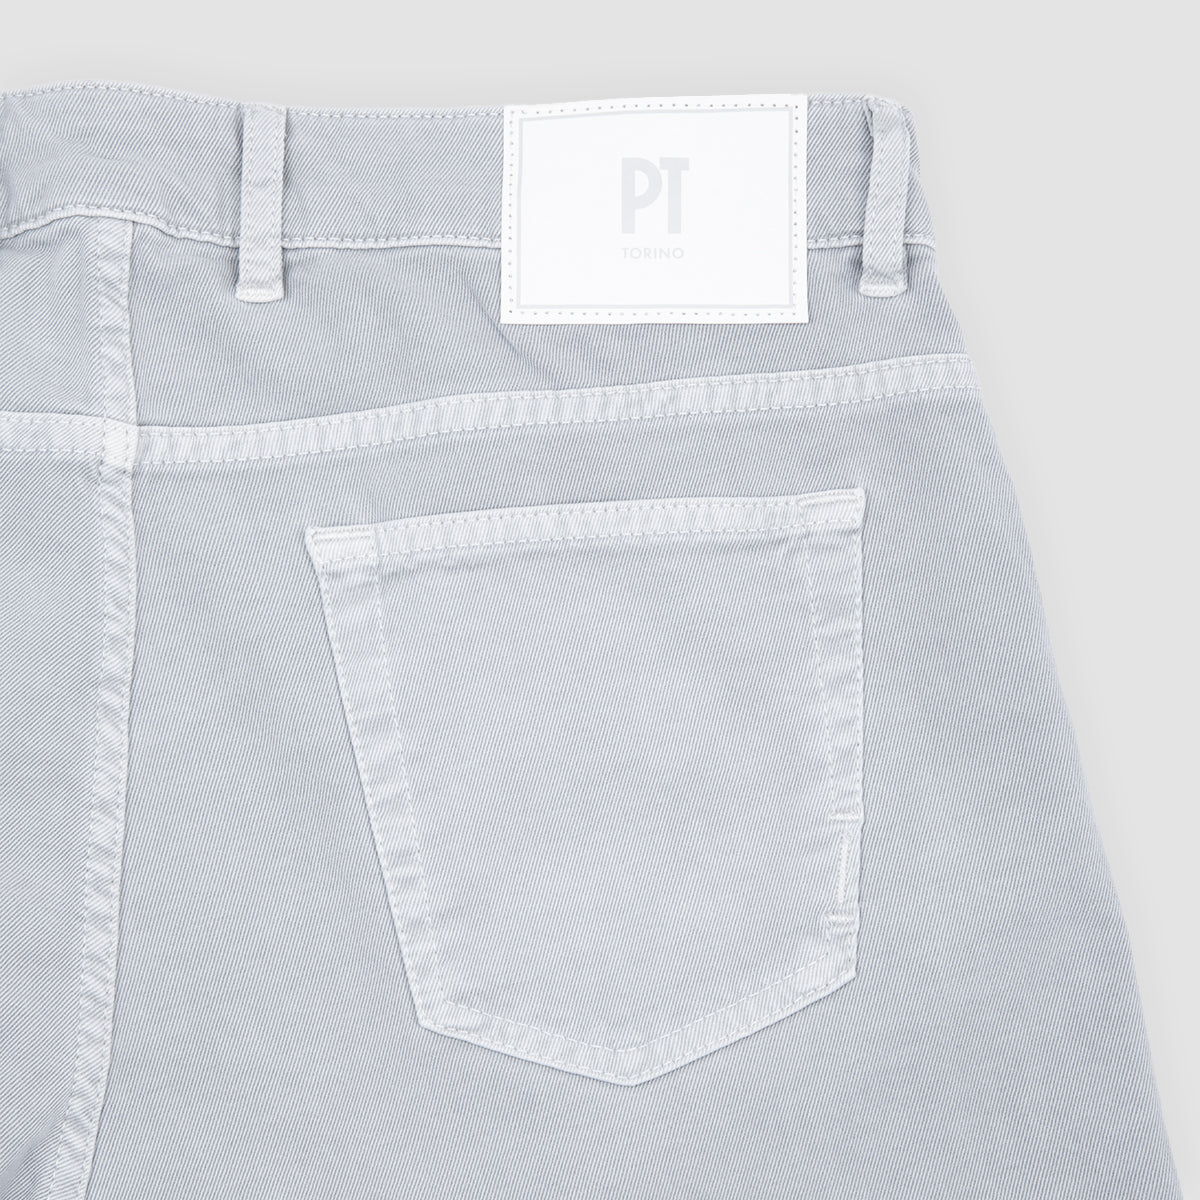 5 Pocket Trousers Cotton Cashmere Stretch Drill - Y214 Grey